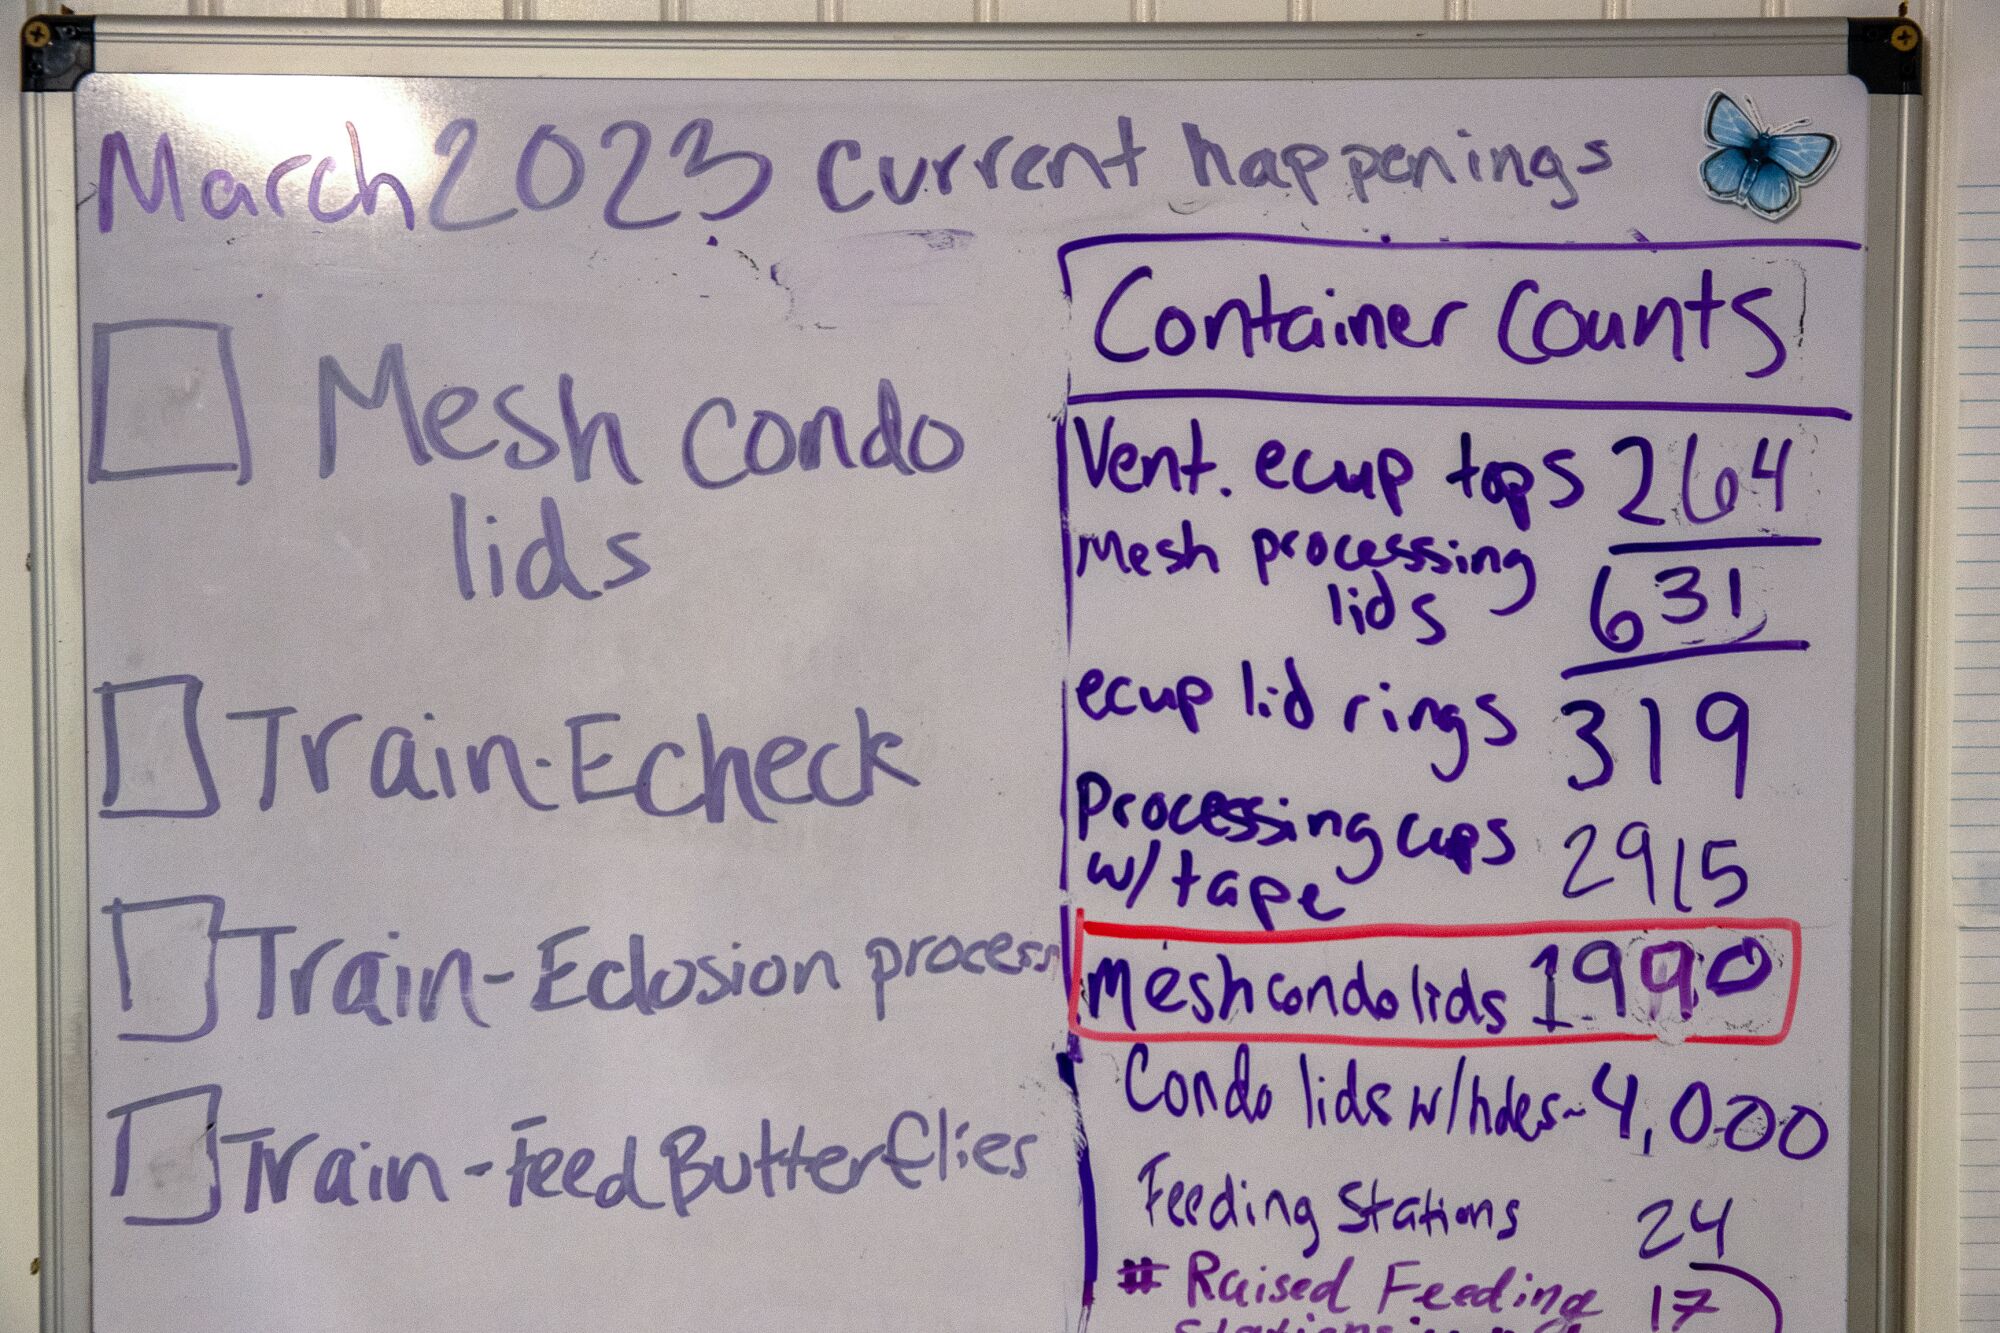 A whiteboard contains such action items as "mesh condo lids" and "train - feed butterflies."